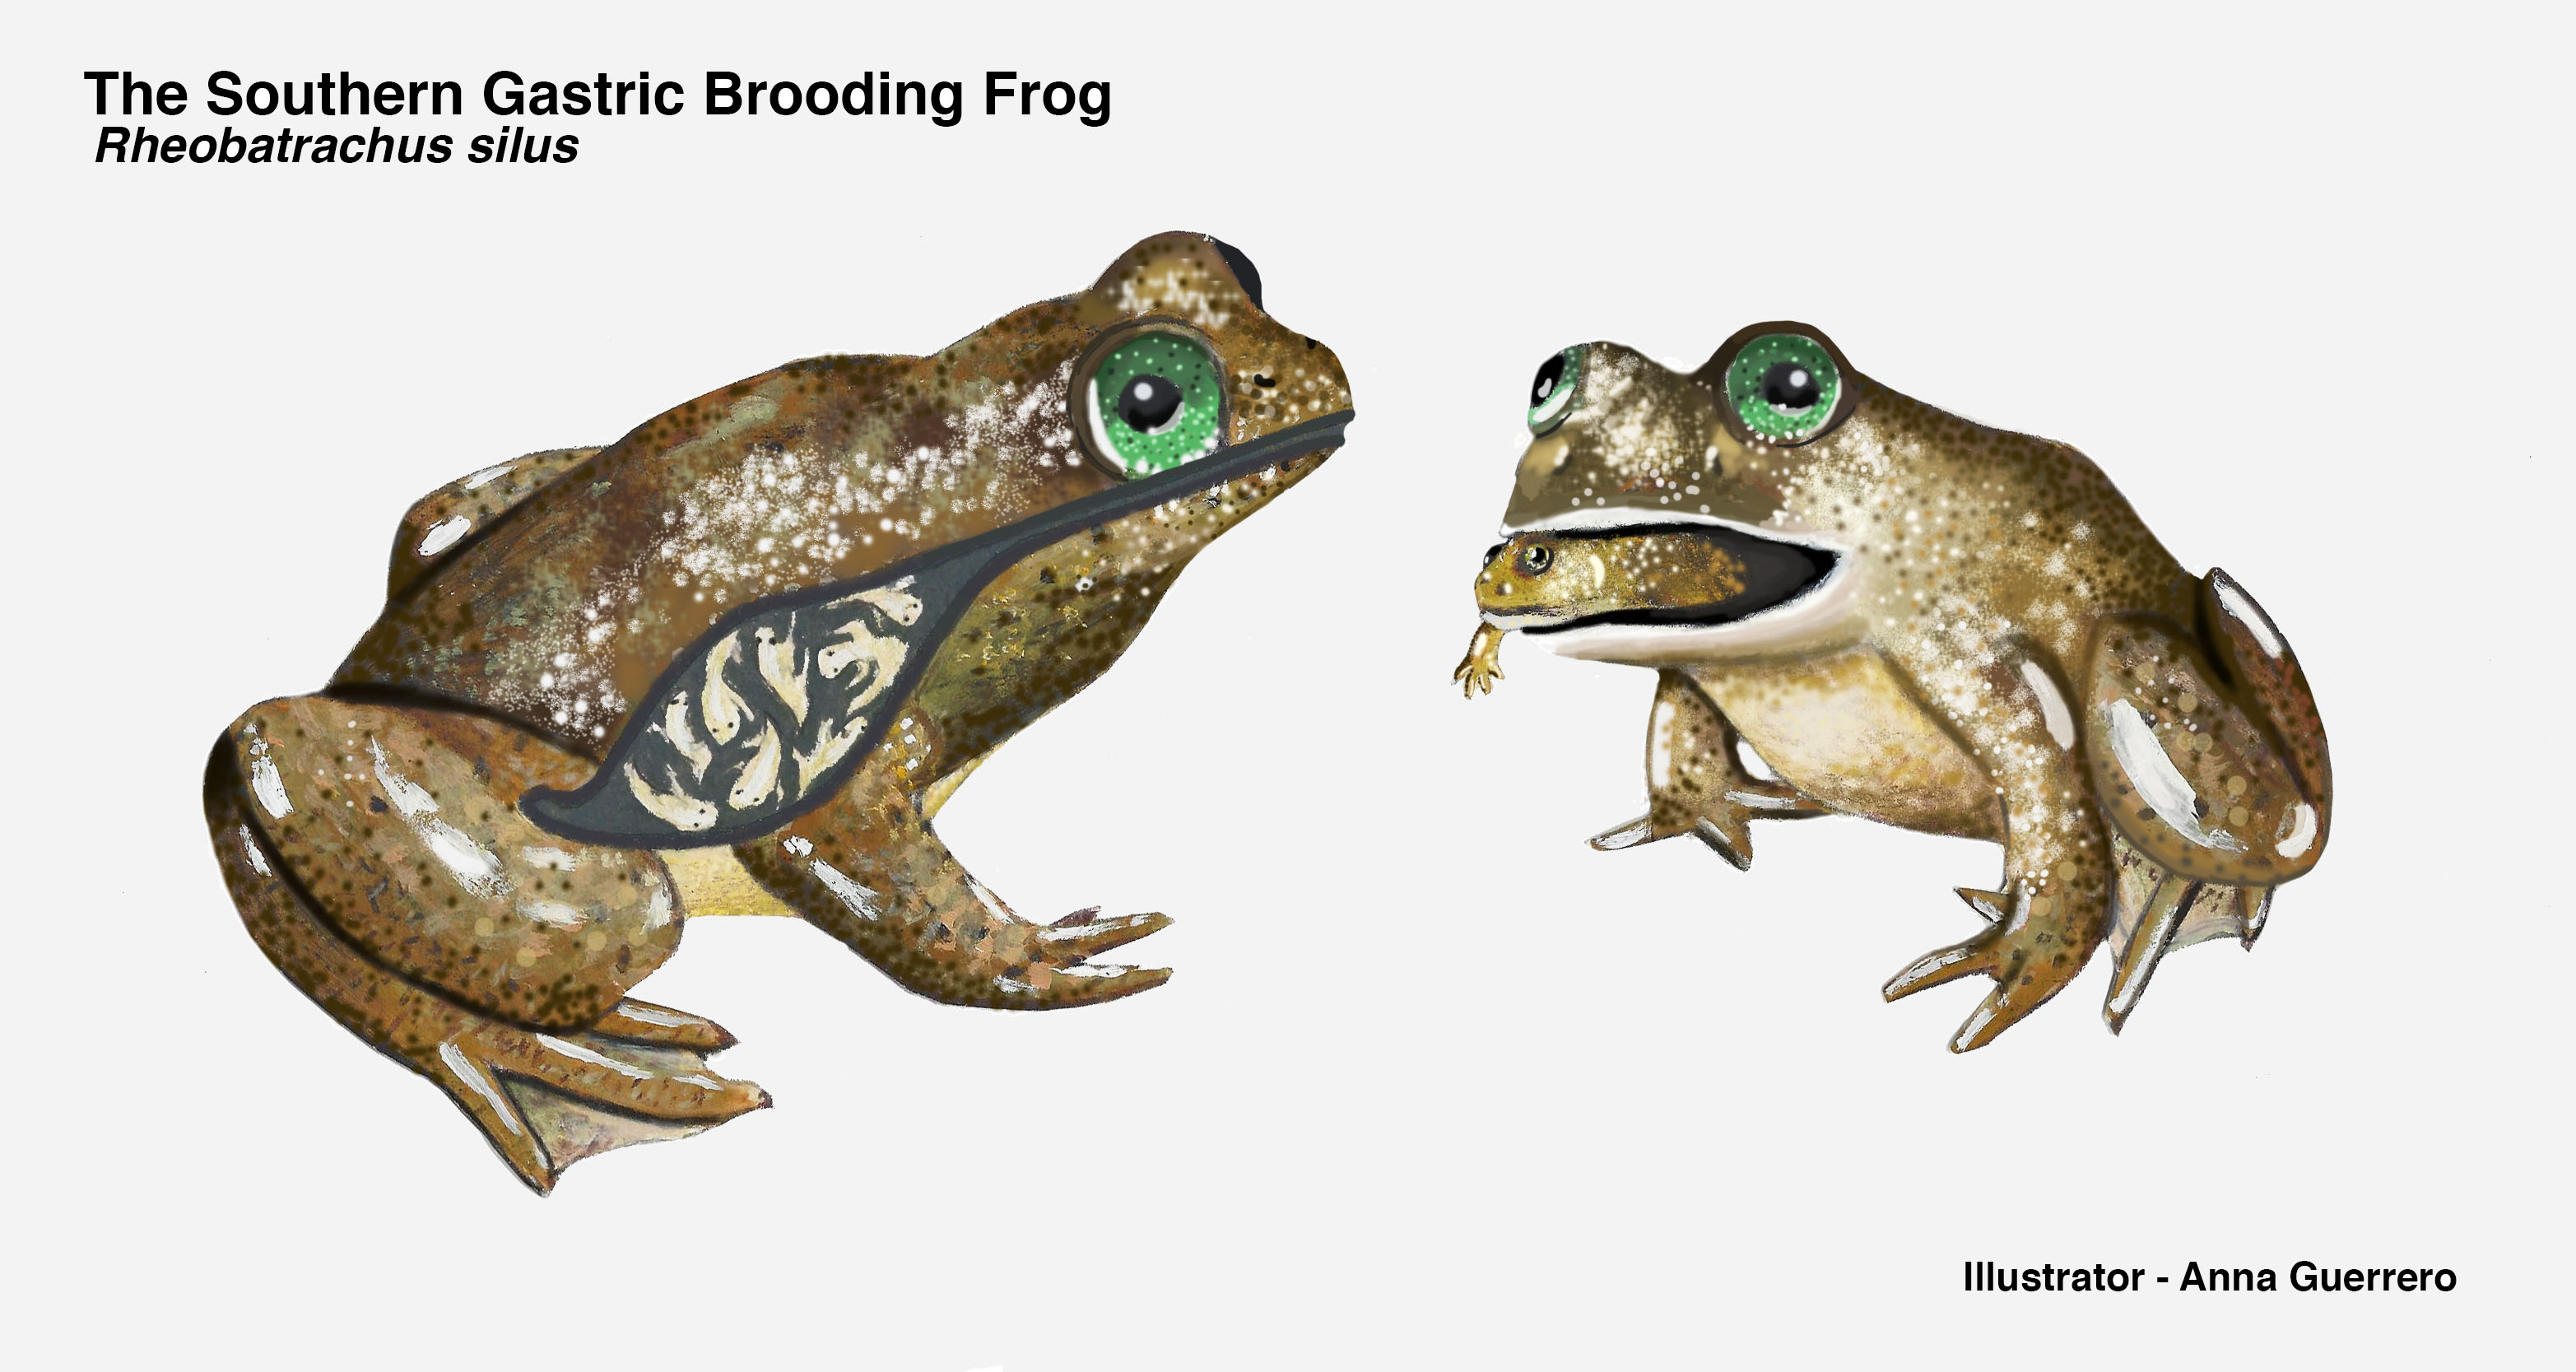 An illustration of two frogs, one with a smaller frog in its mouth